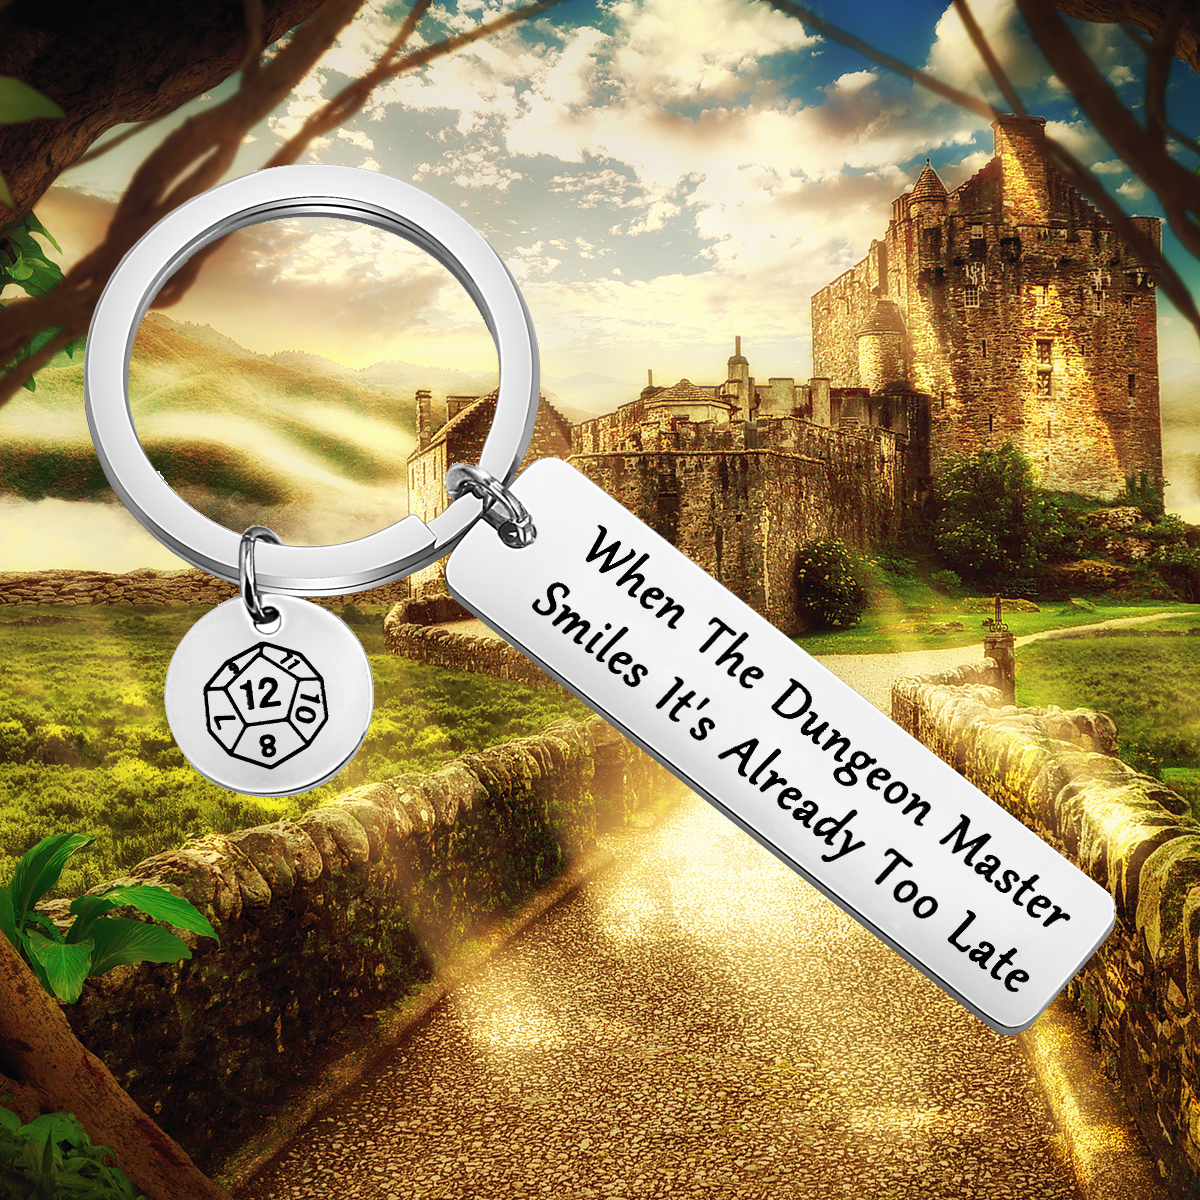 When The Dungeon Master Smiles It's Already Too Late Keychain Dungeon Master Gift Funny Dungeons and Dragons Gifts - image 5 of 5